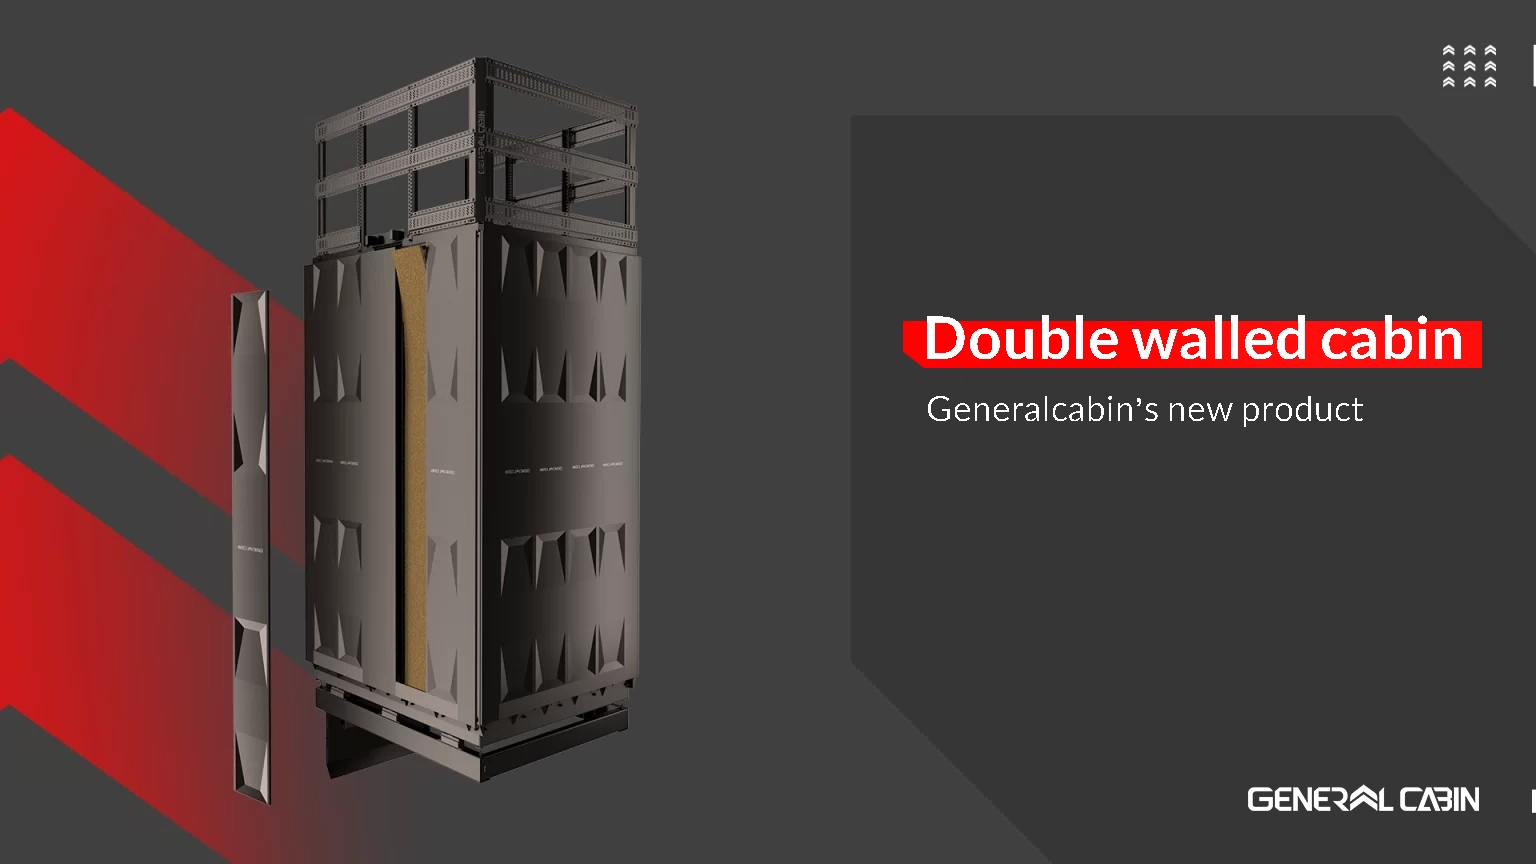 Double-walled cabins